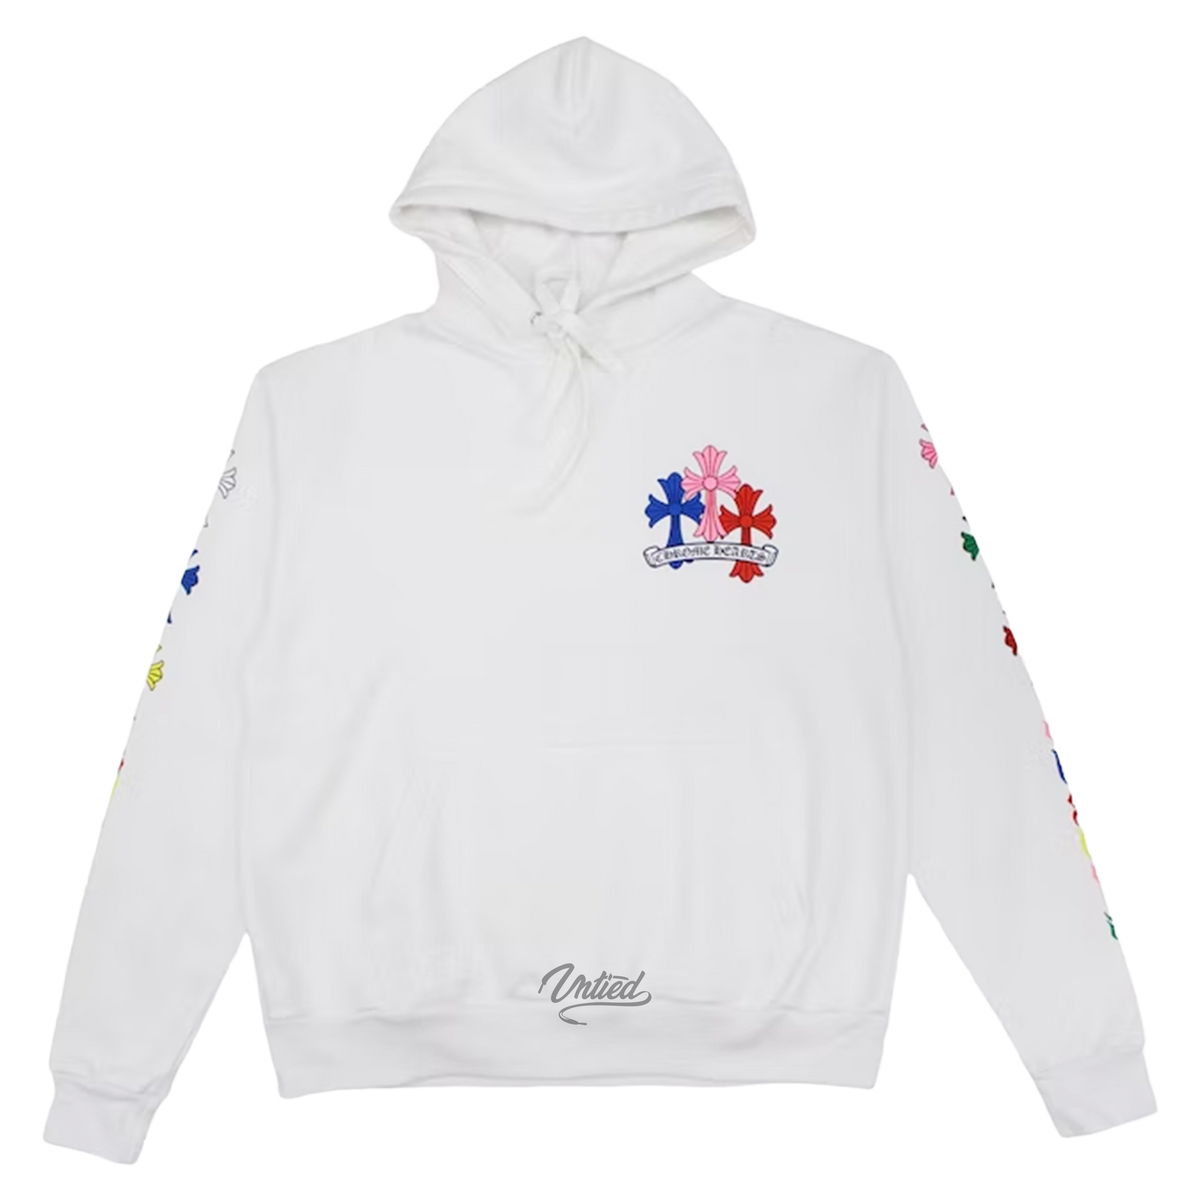 Chrome Hearts Cemetery Patches Hoodie Navy/Red